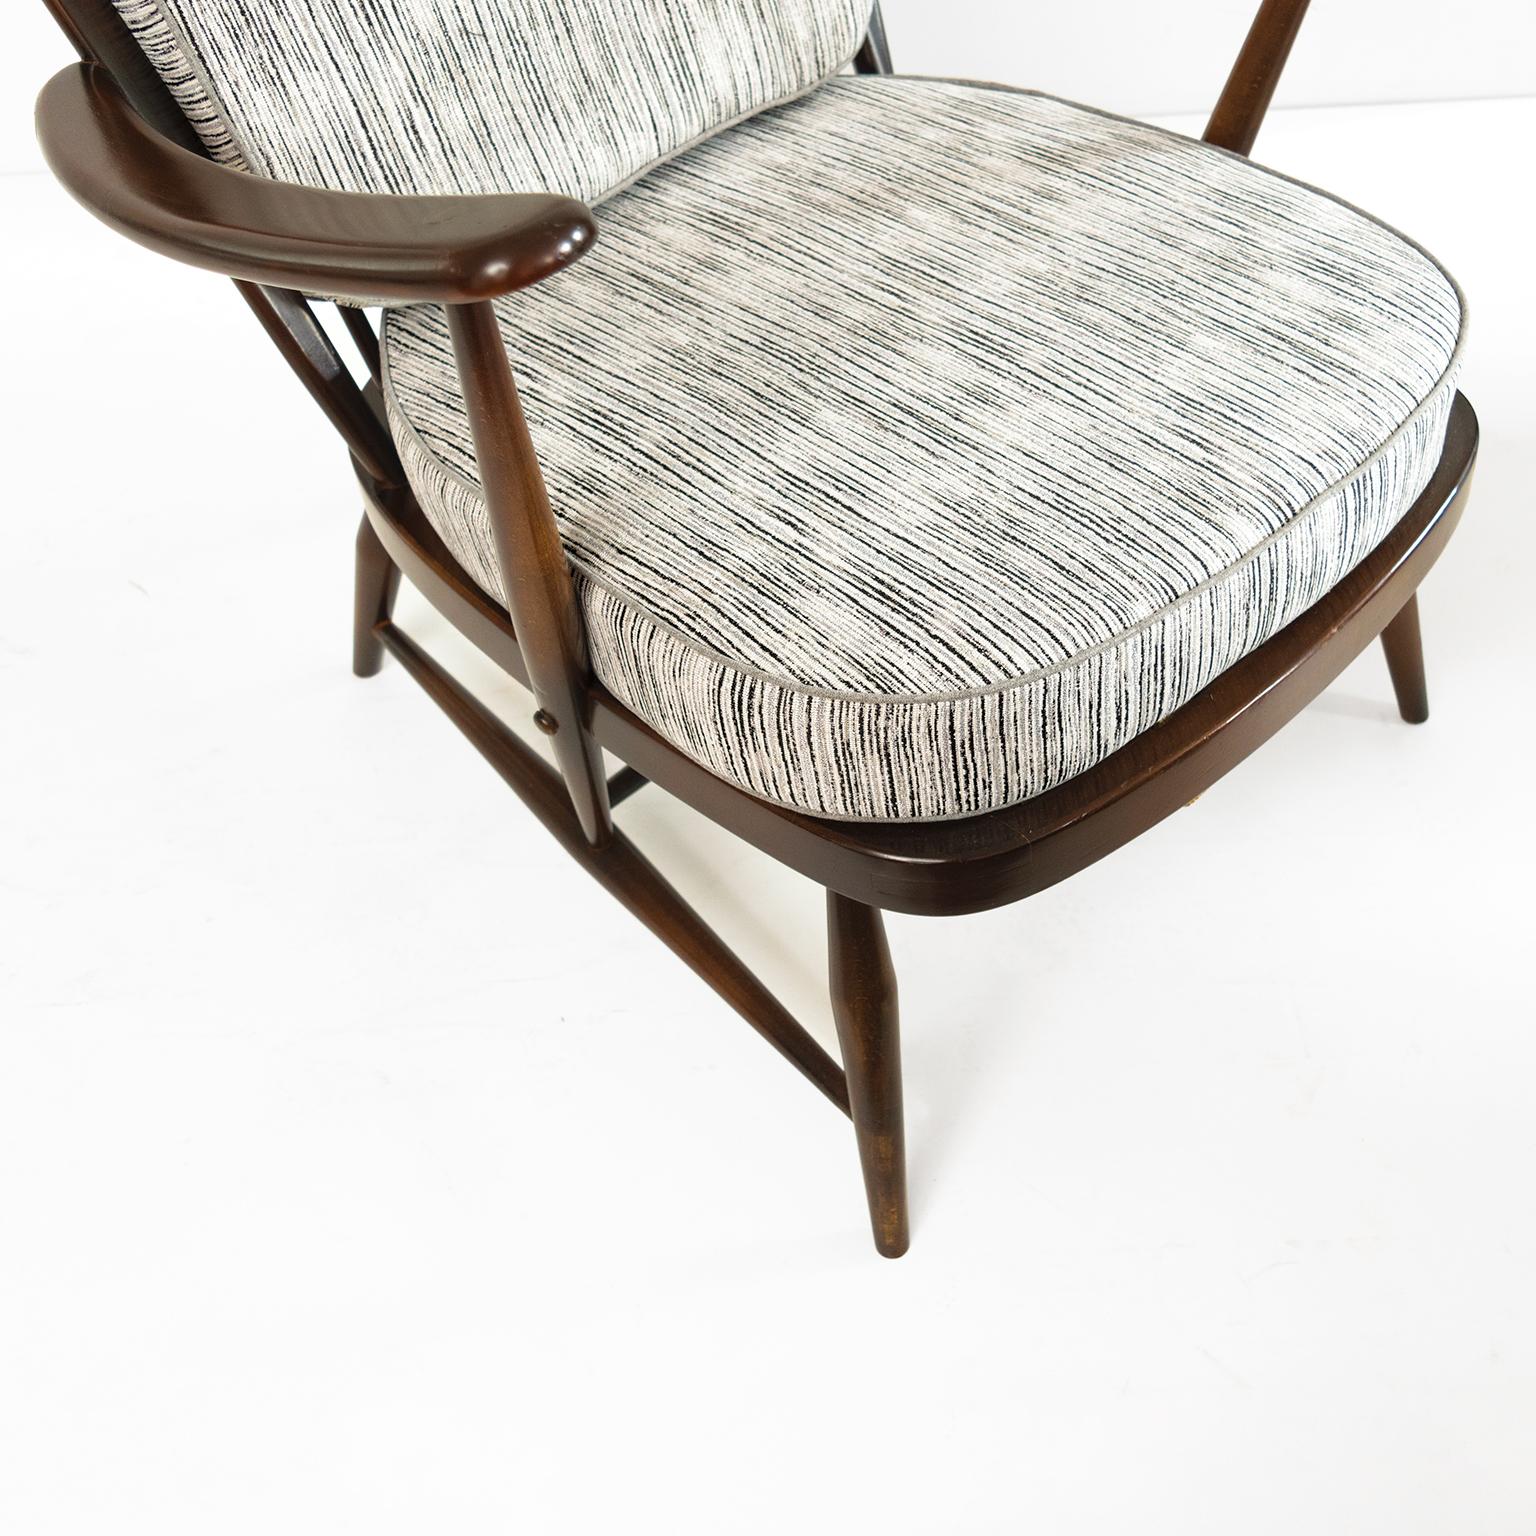 Mid-Century Modern Lucian Randolph Ercolani Designed “Windsor” Chairs for Ercol, England, 1950's